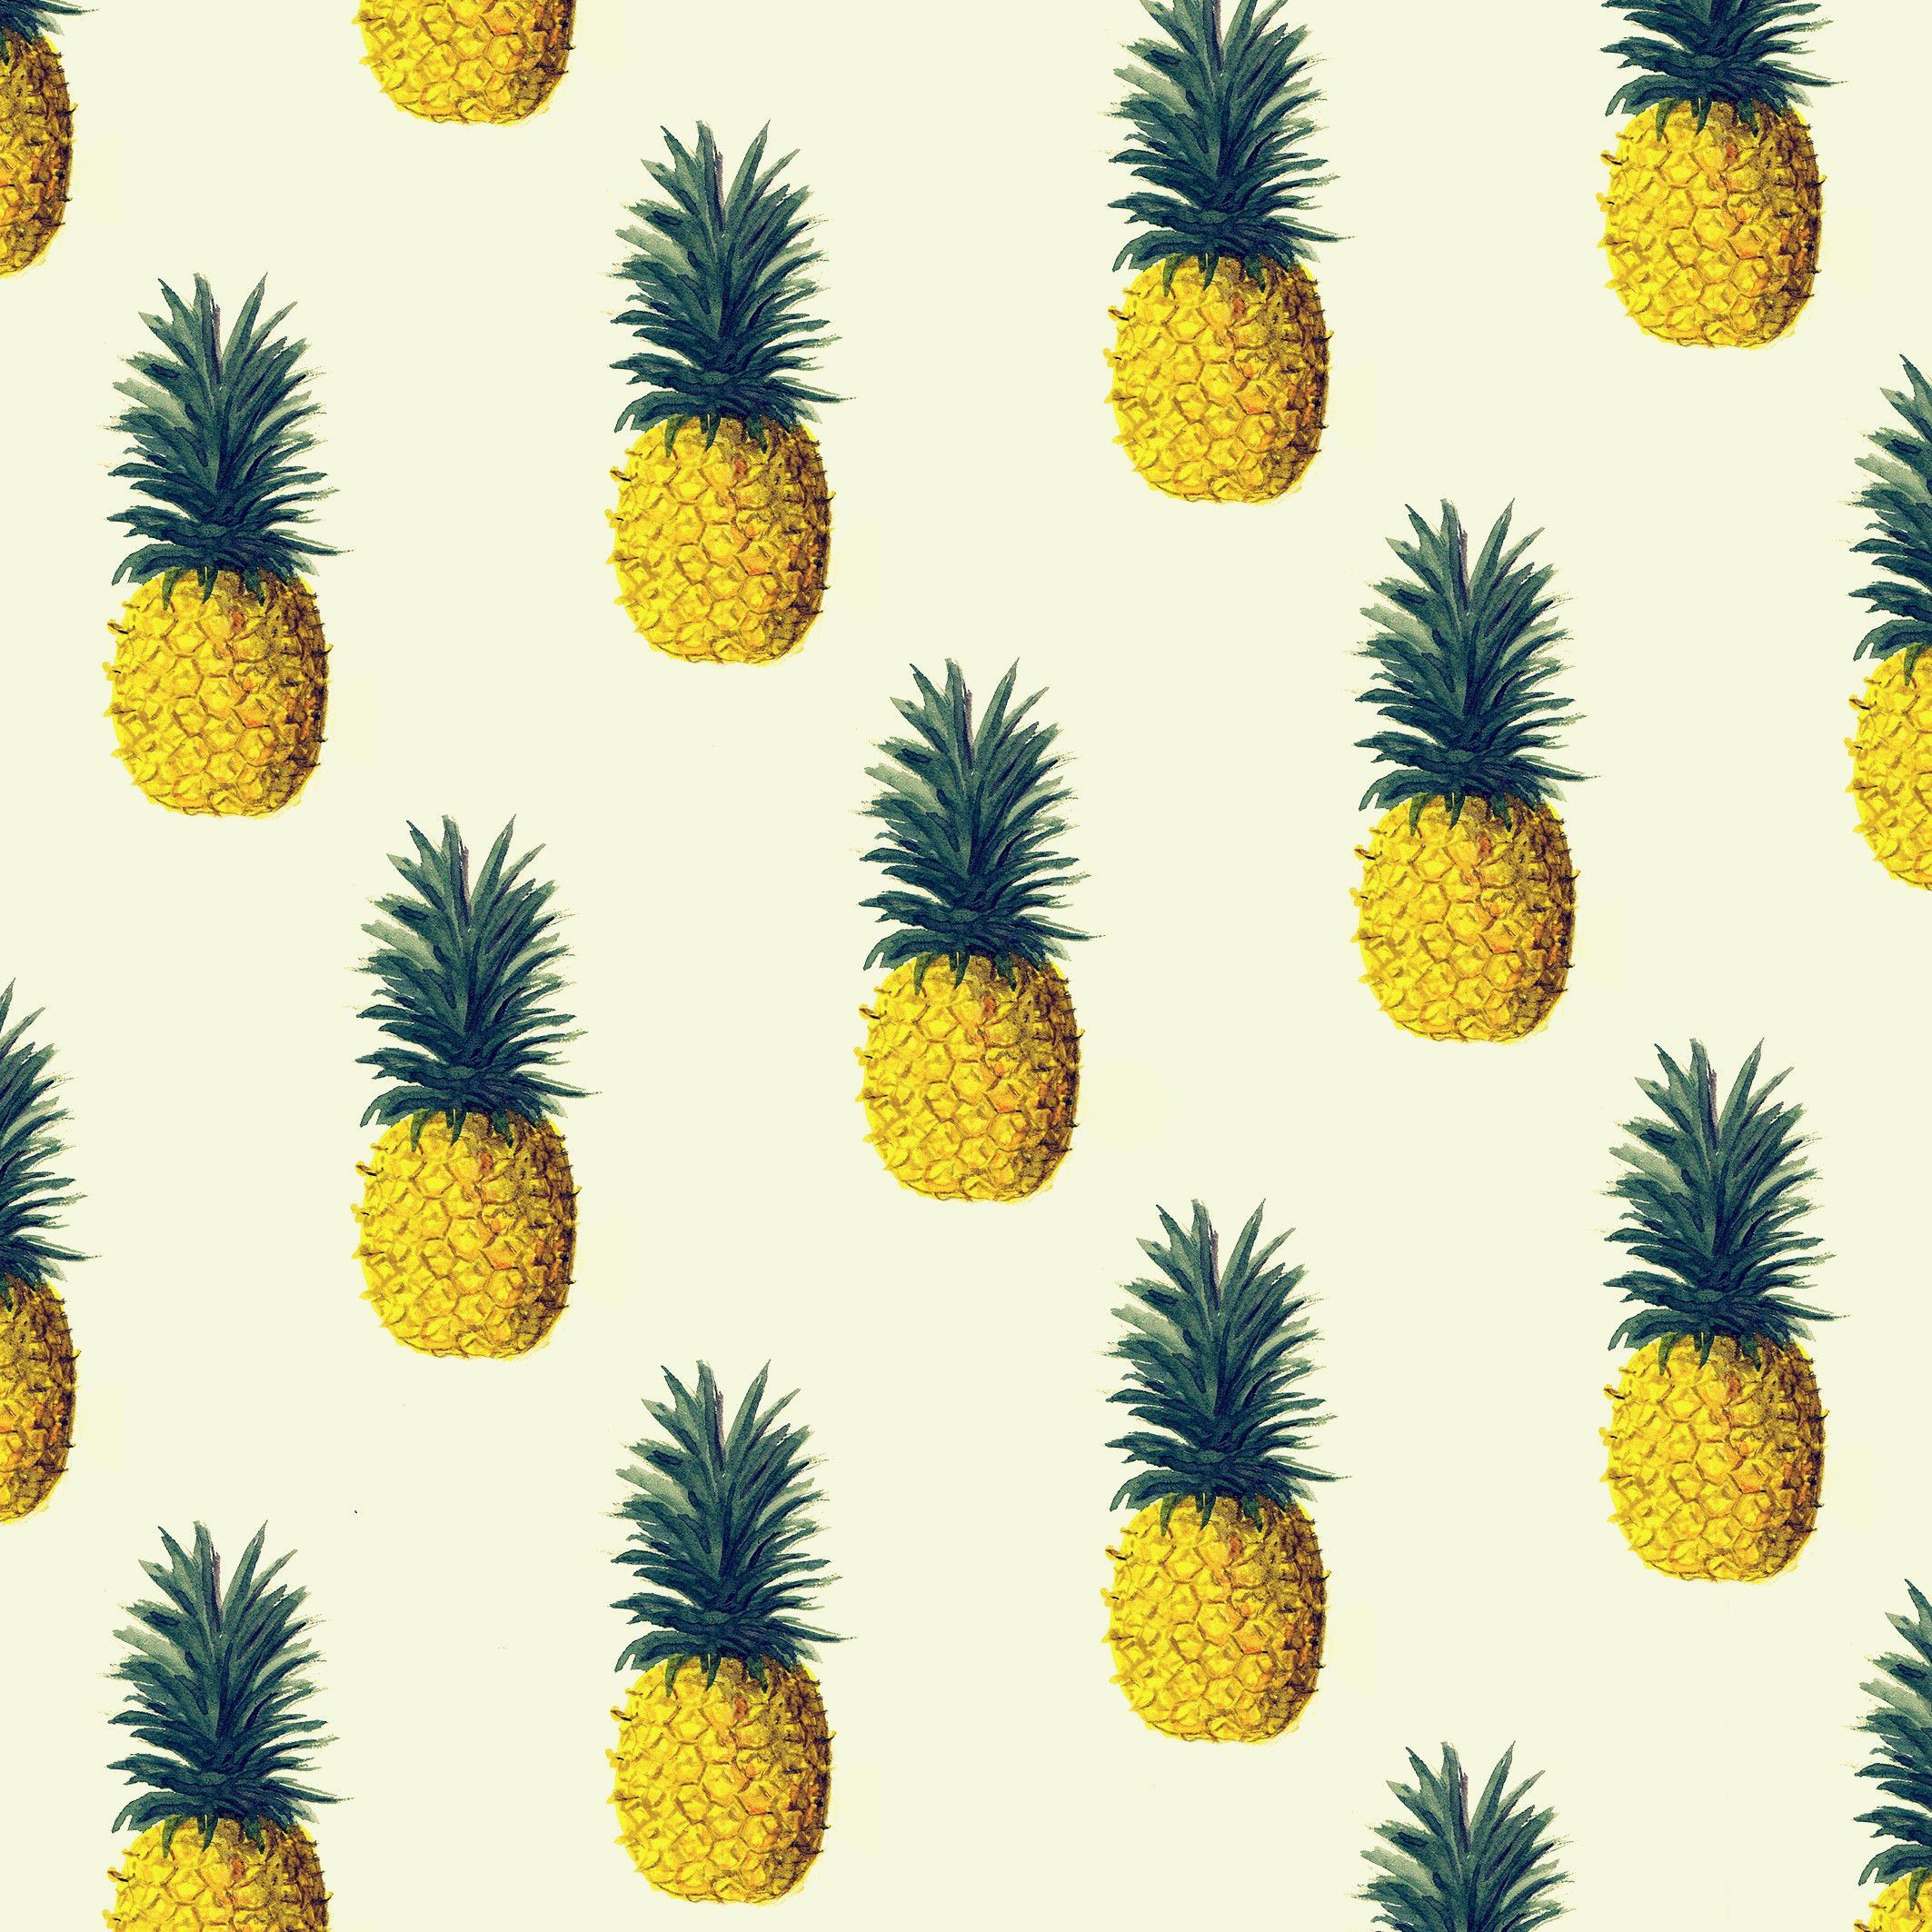 Pineapple Hd Images 2126x2126